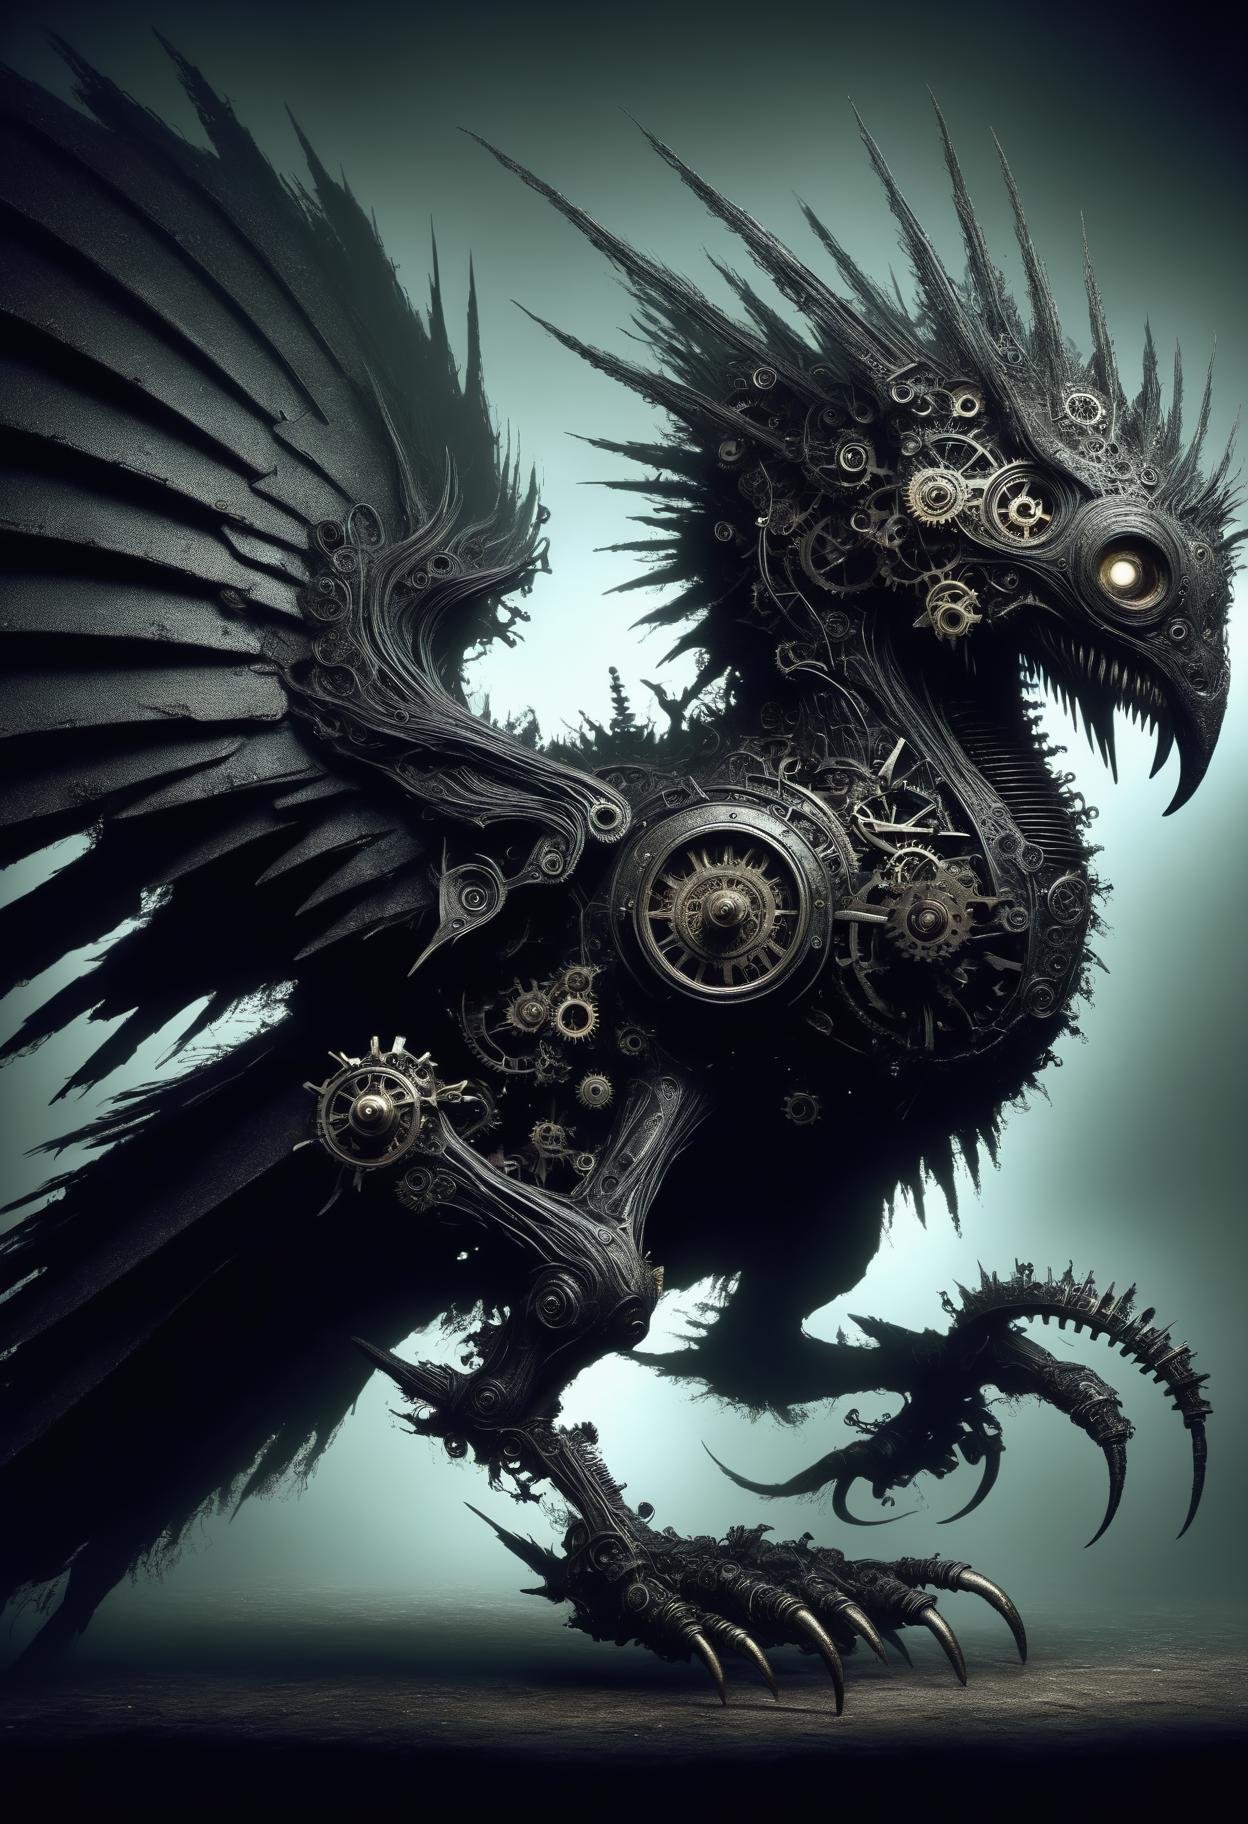 enormous avian scaled eclectic wormlike entity,  padded appendages,  spiked-tailed, spiky scales,  tufted ears,  mechanical wings made of gears and cogs and clockwork, ,DonM3v1lM4dn355XL, stygical, evil, dark  <lora:DonM3v1lM4dn355XL-000010:1.0>